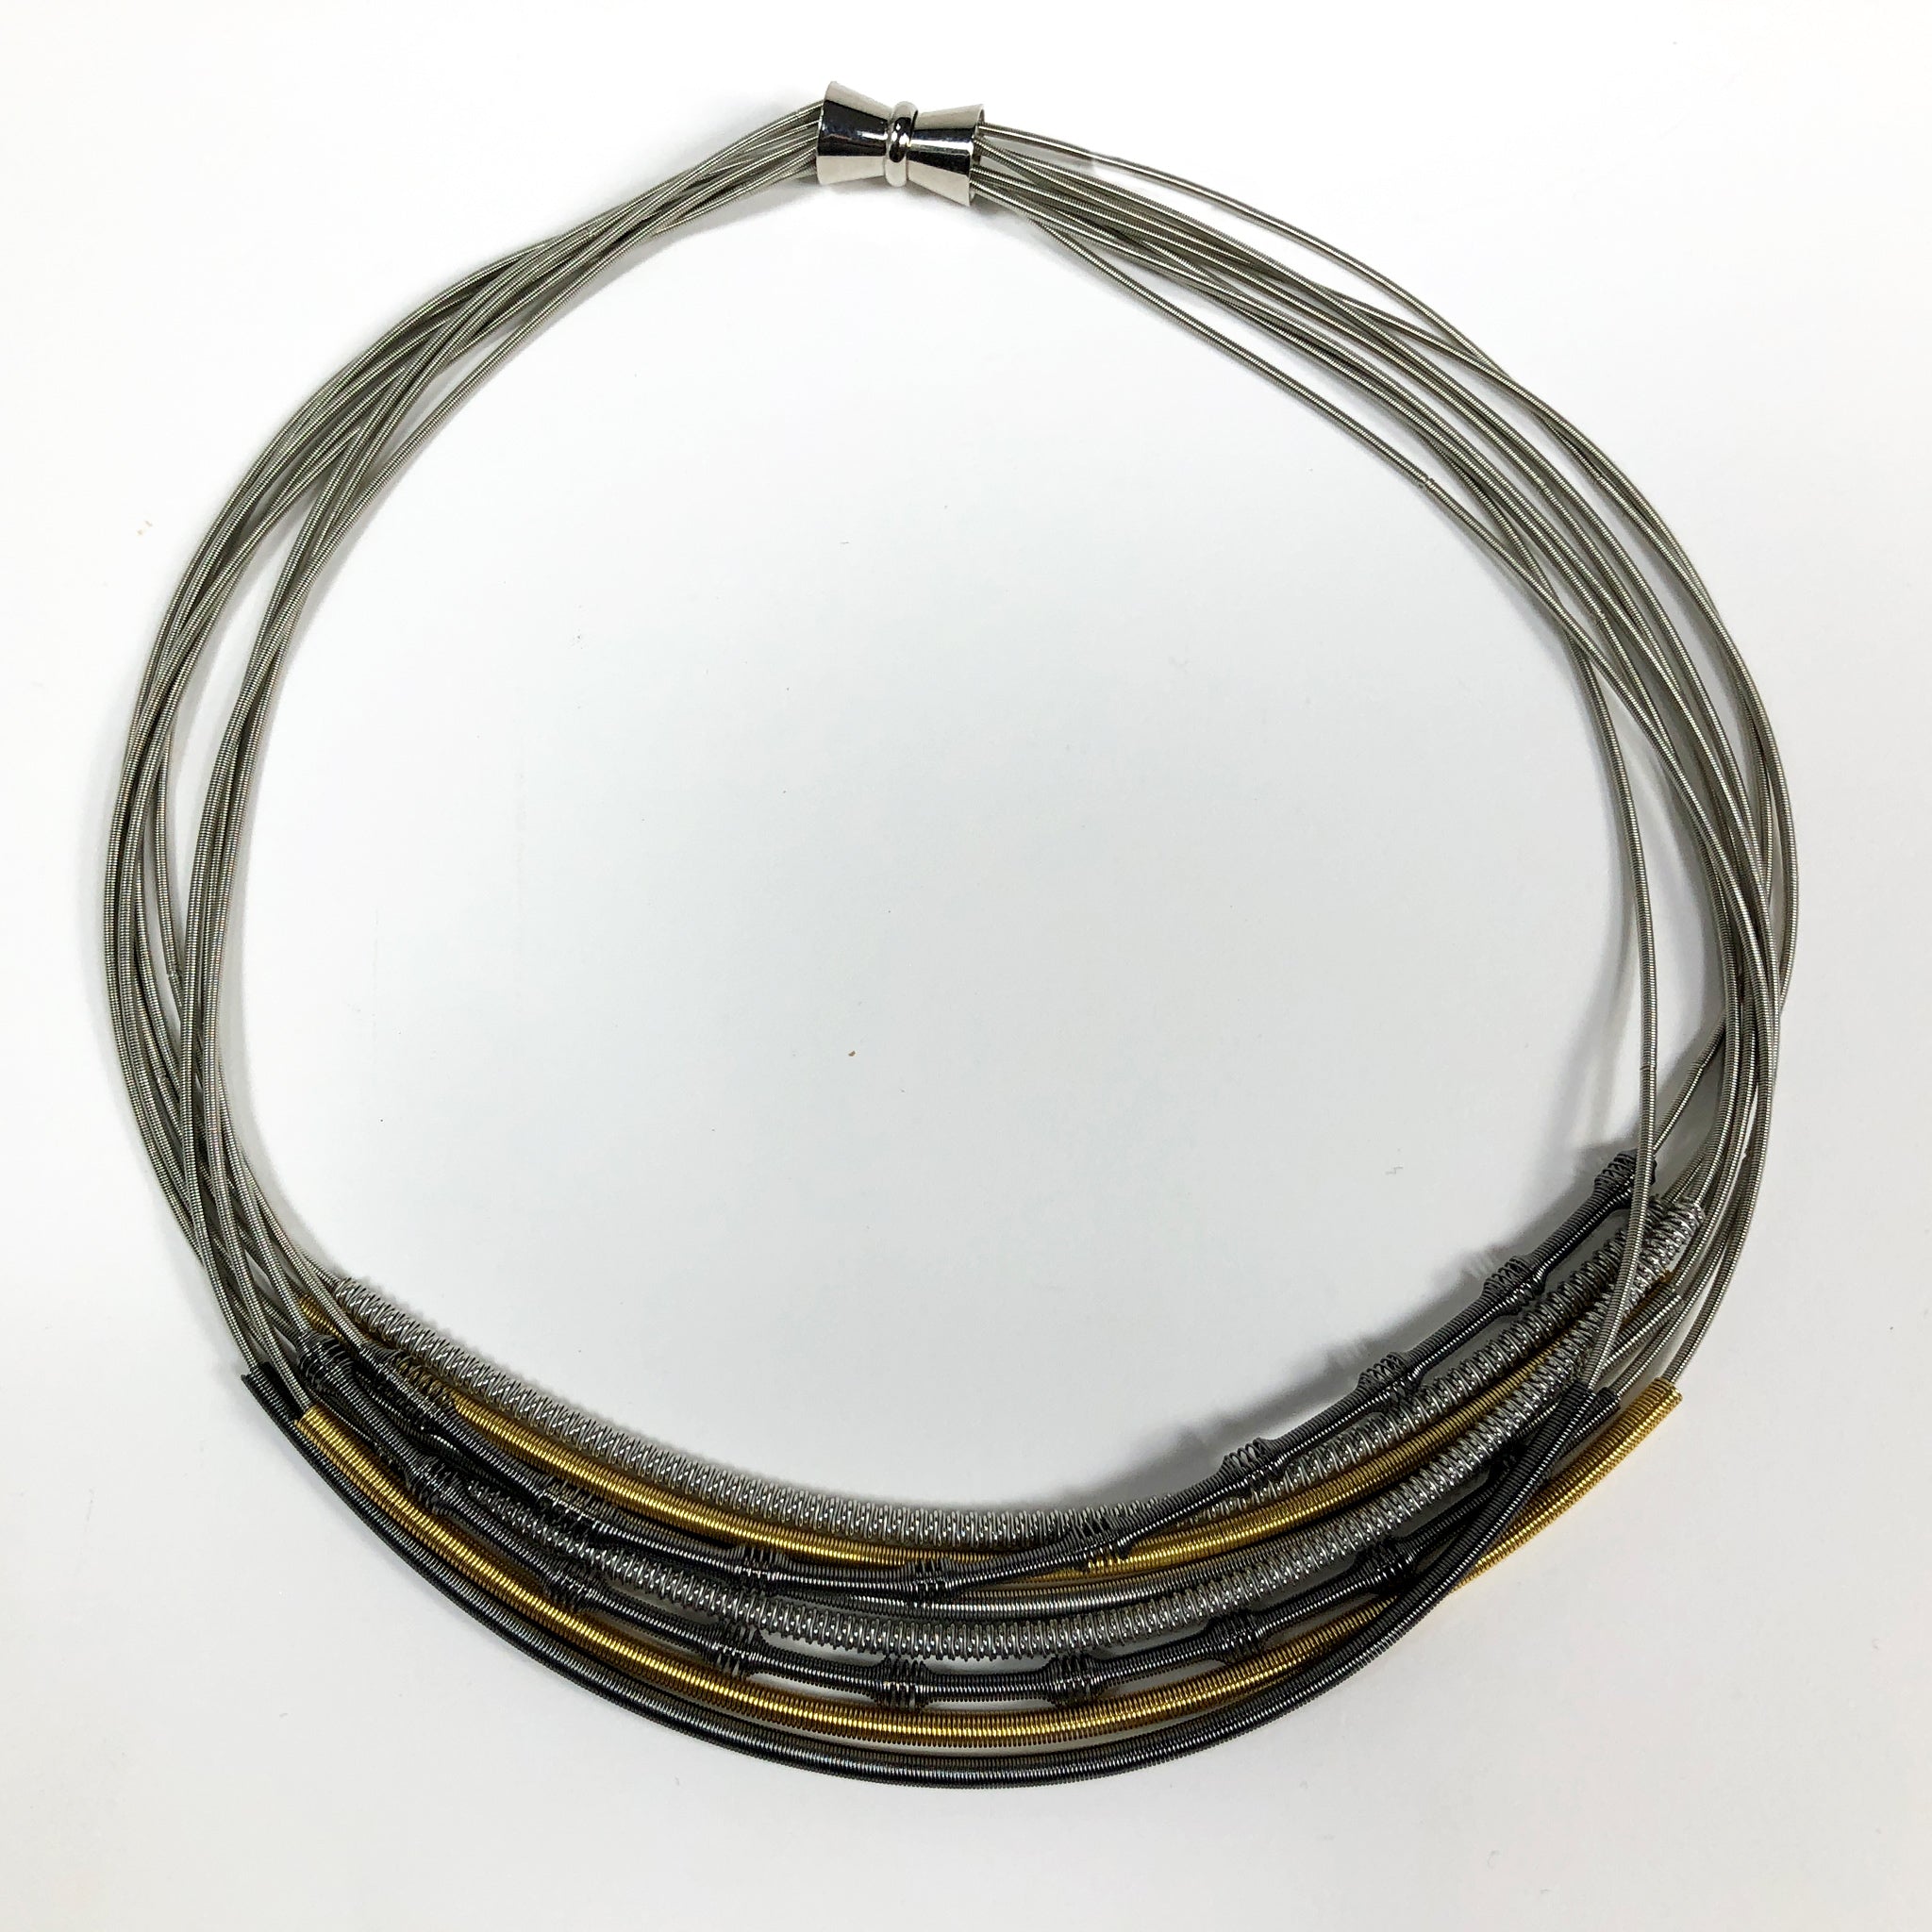 Champagne Piano Wire Knot Necklace